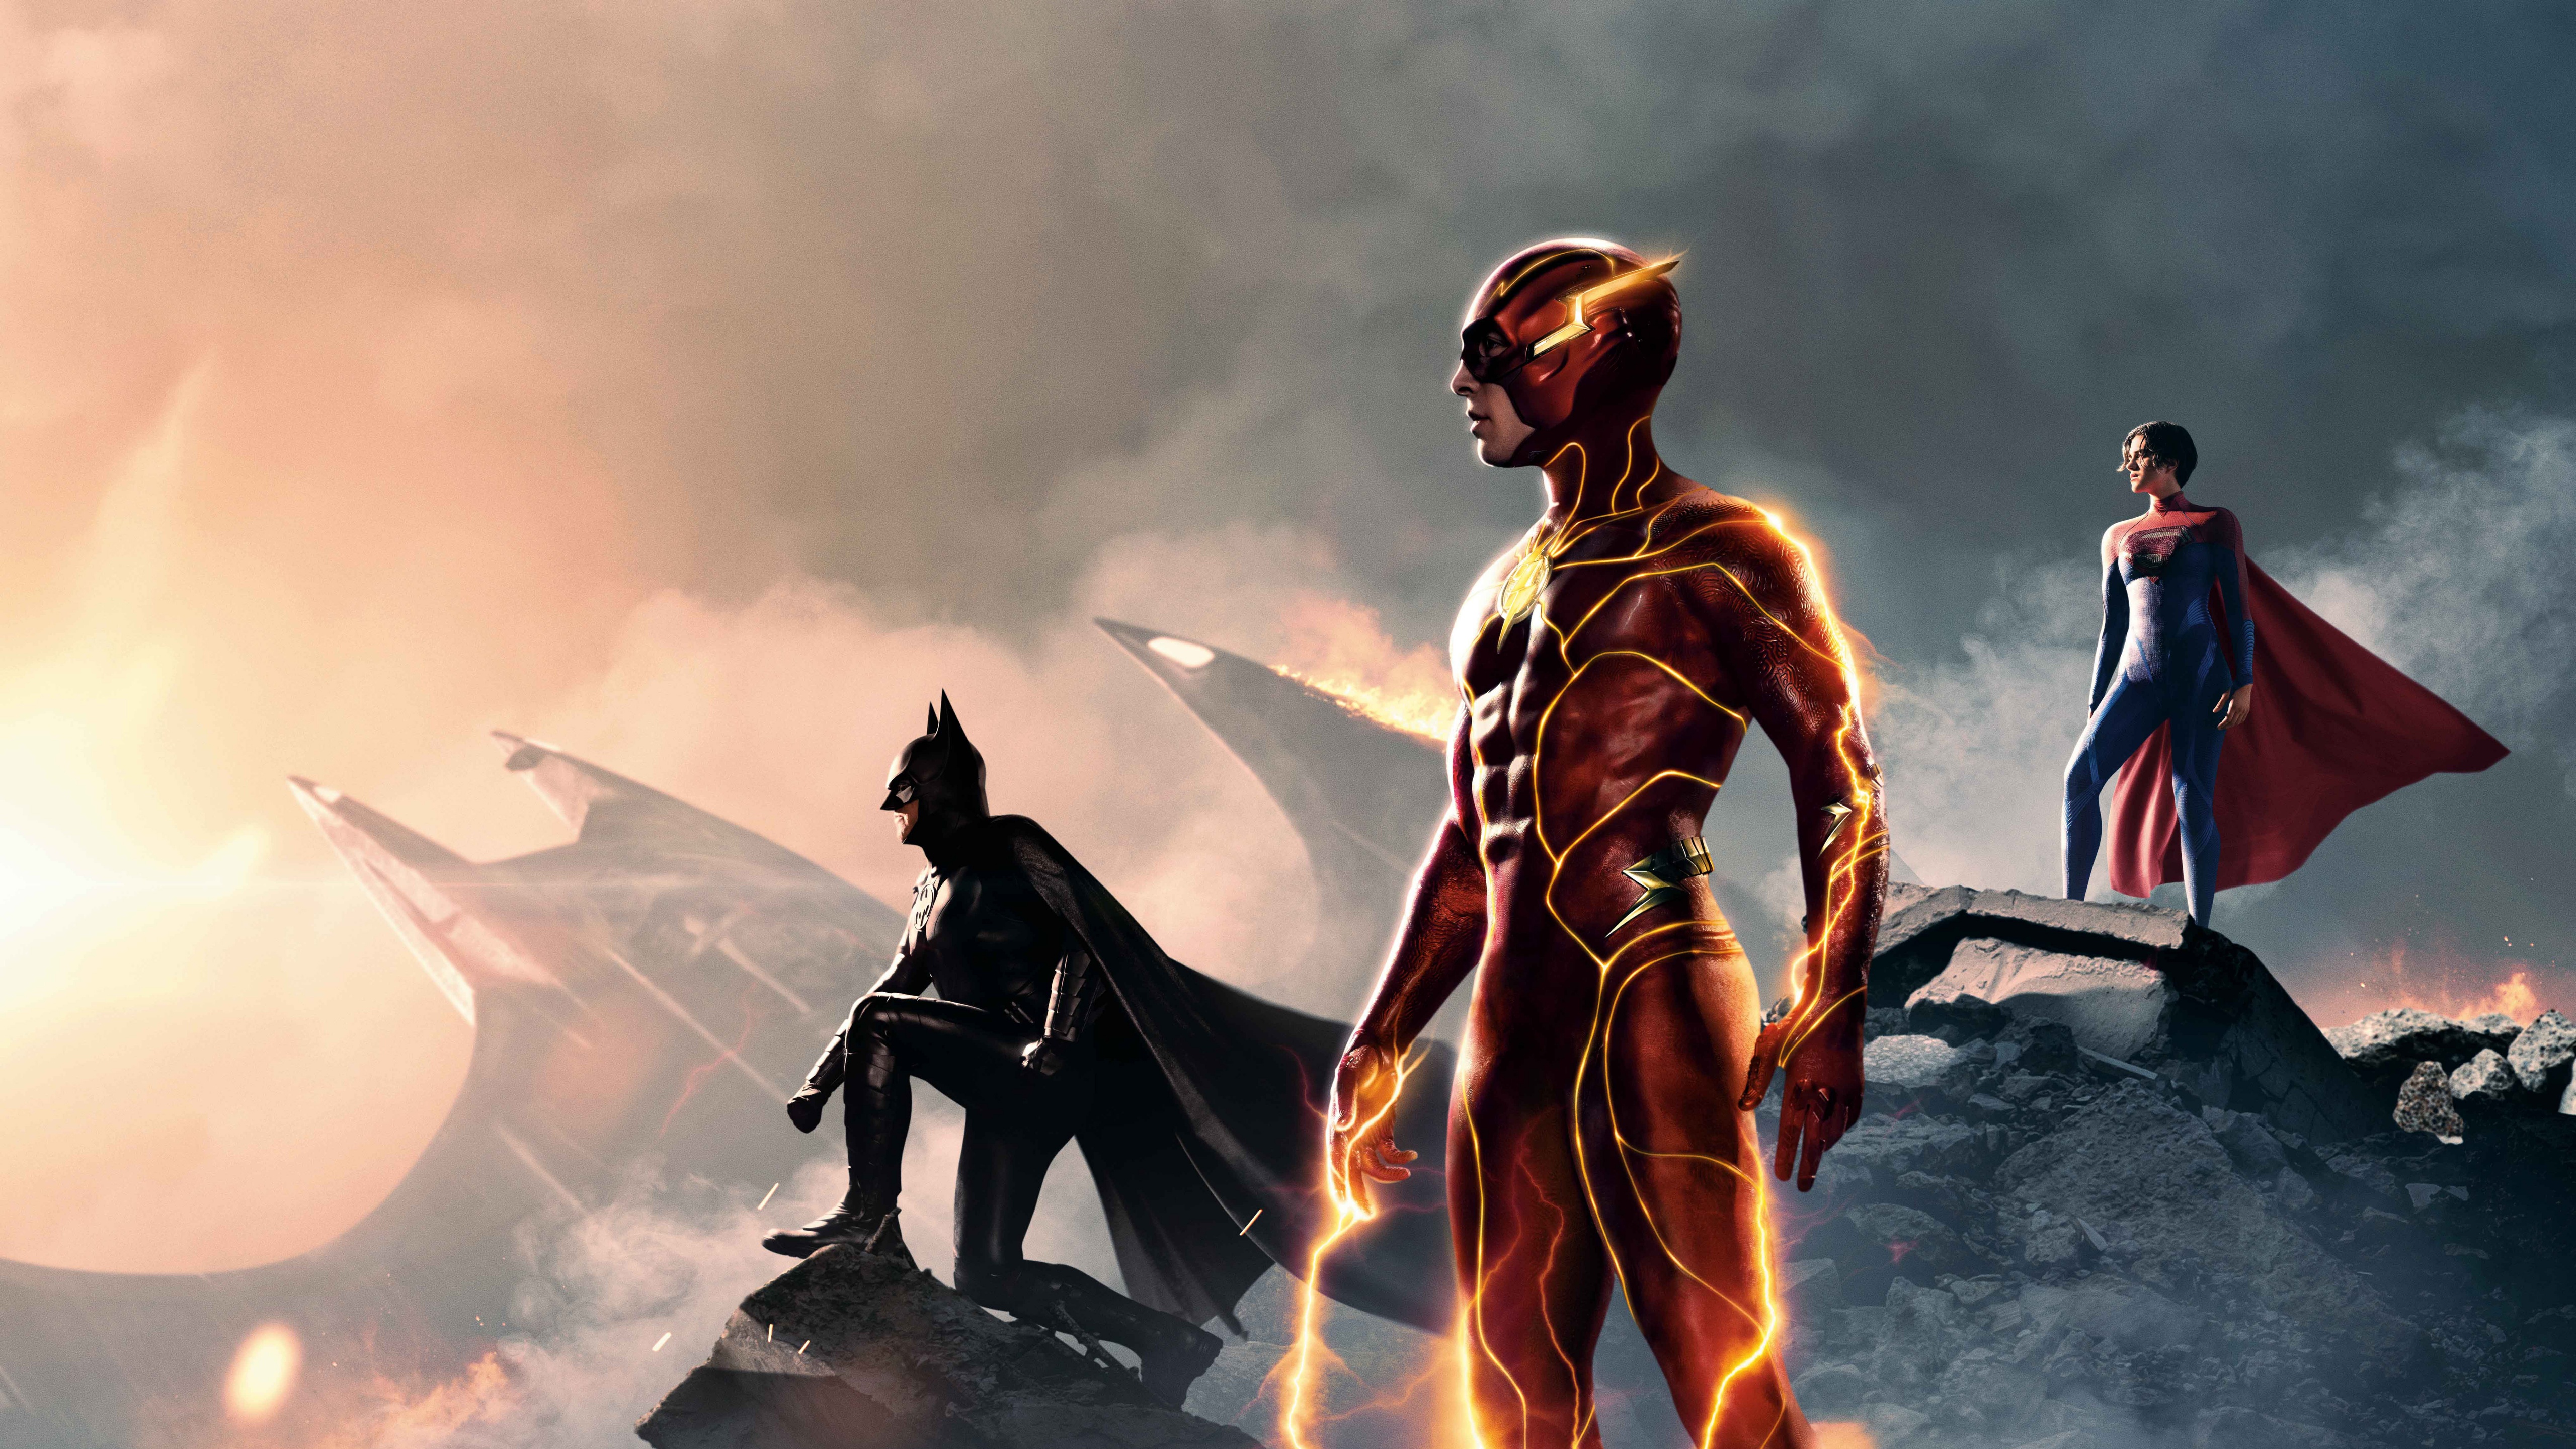 The Ultimate Flash Filme Collection to Satisfy Your Cravings